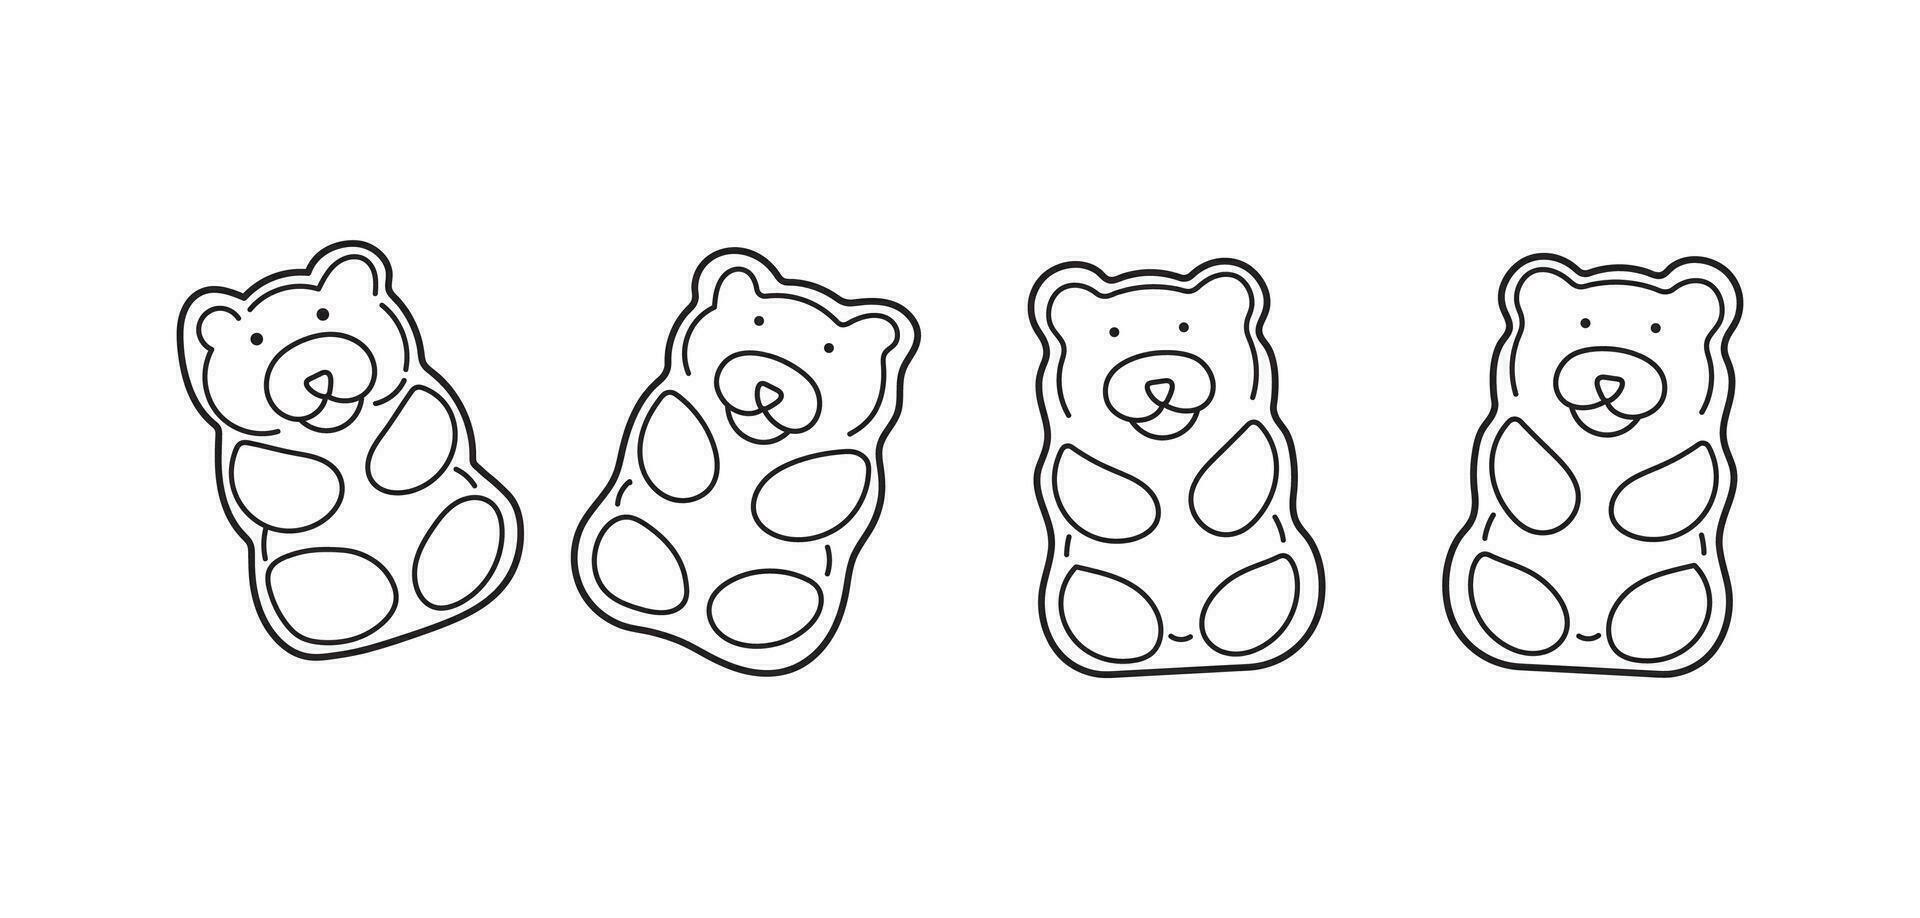 Hand drawn Kids drawing Cartoon Vector illustration cute gummy bears Isolated on White Background